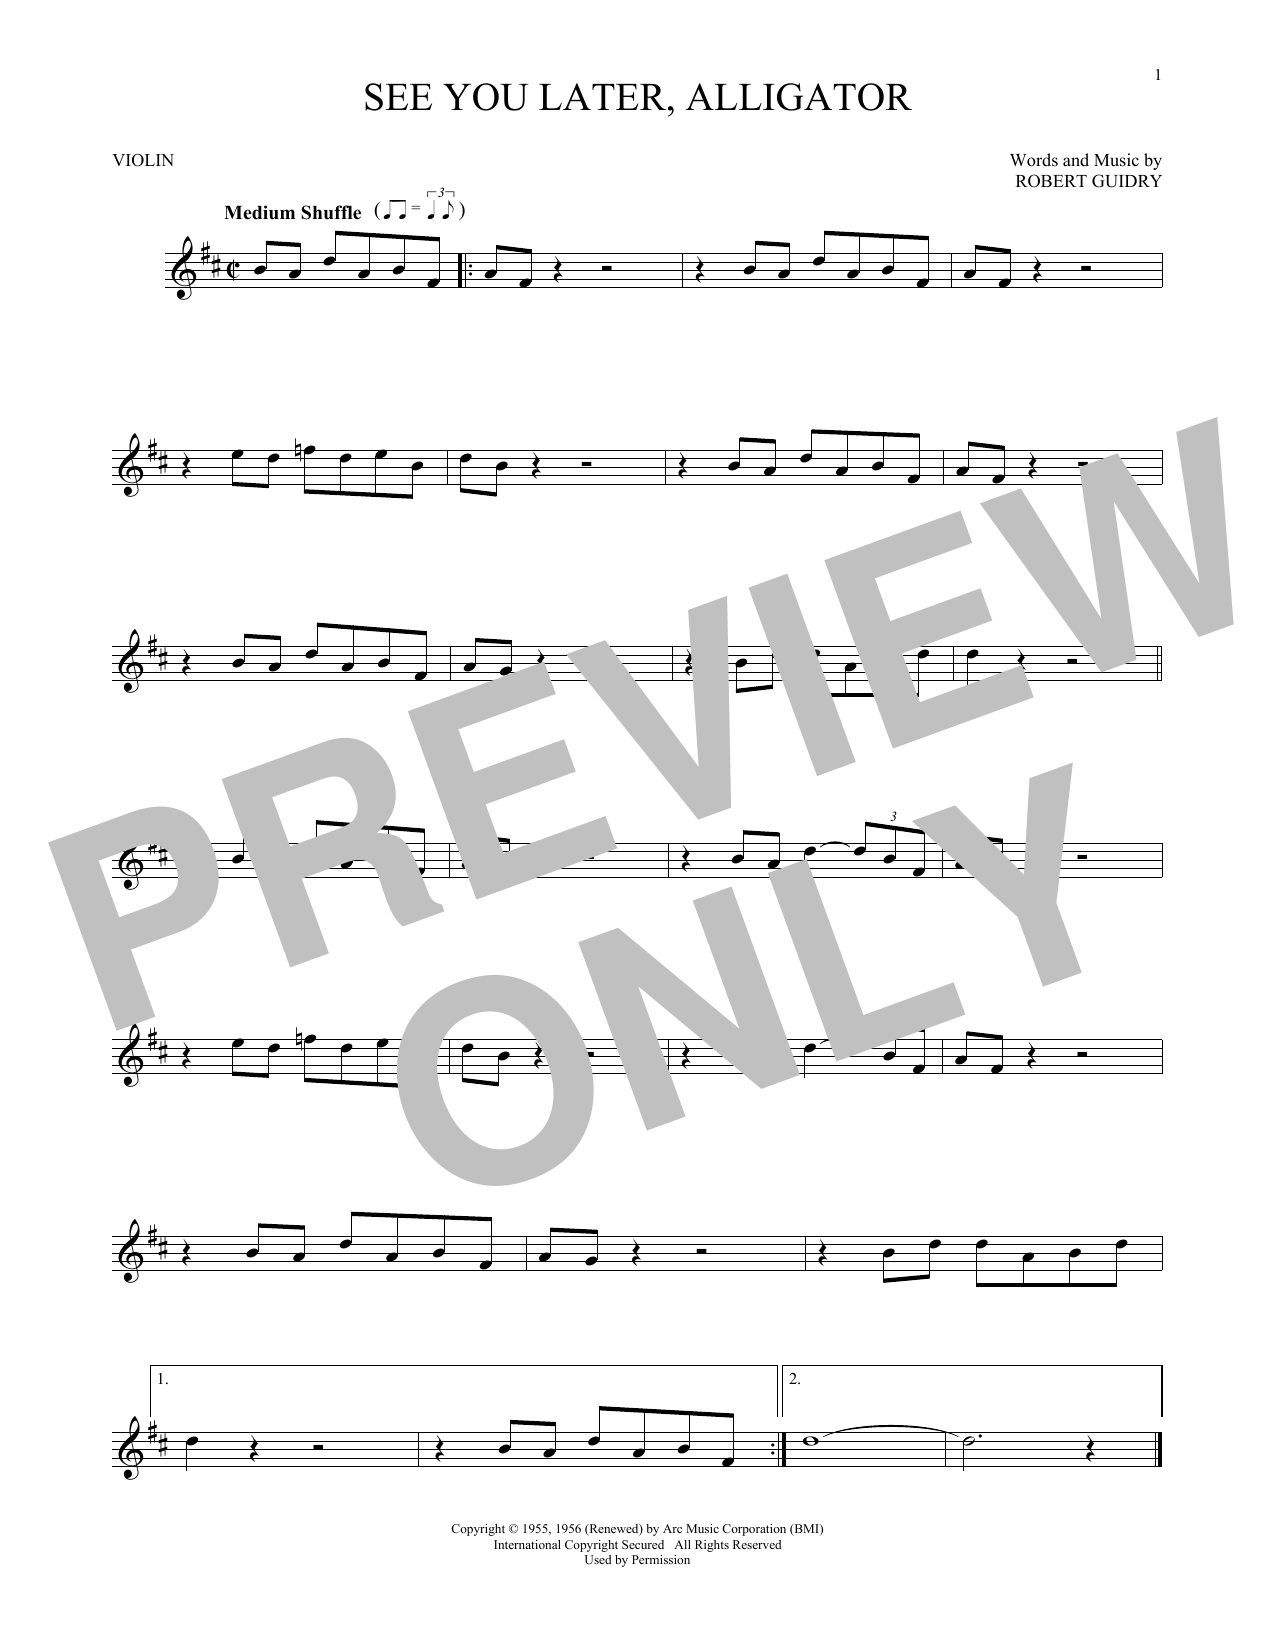 Download Bill Haley & His Comets See You Later, Alligator Sheet Music